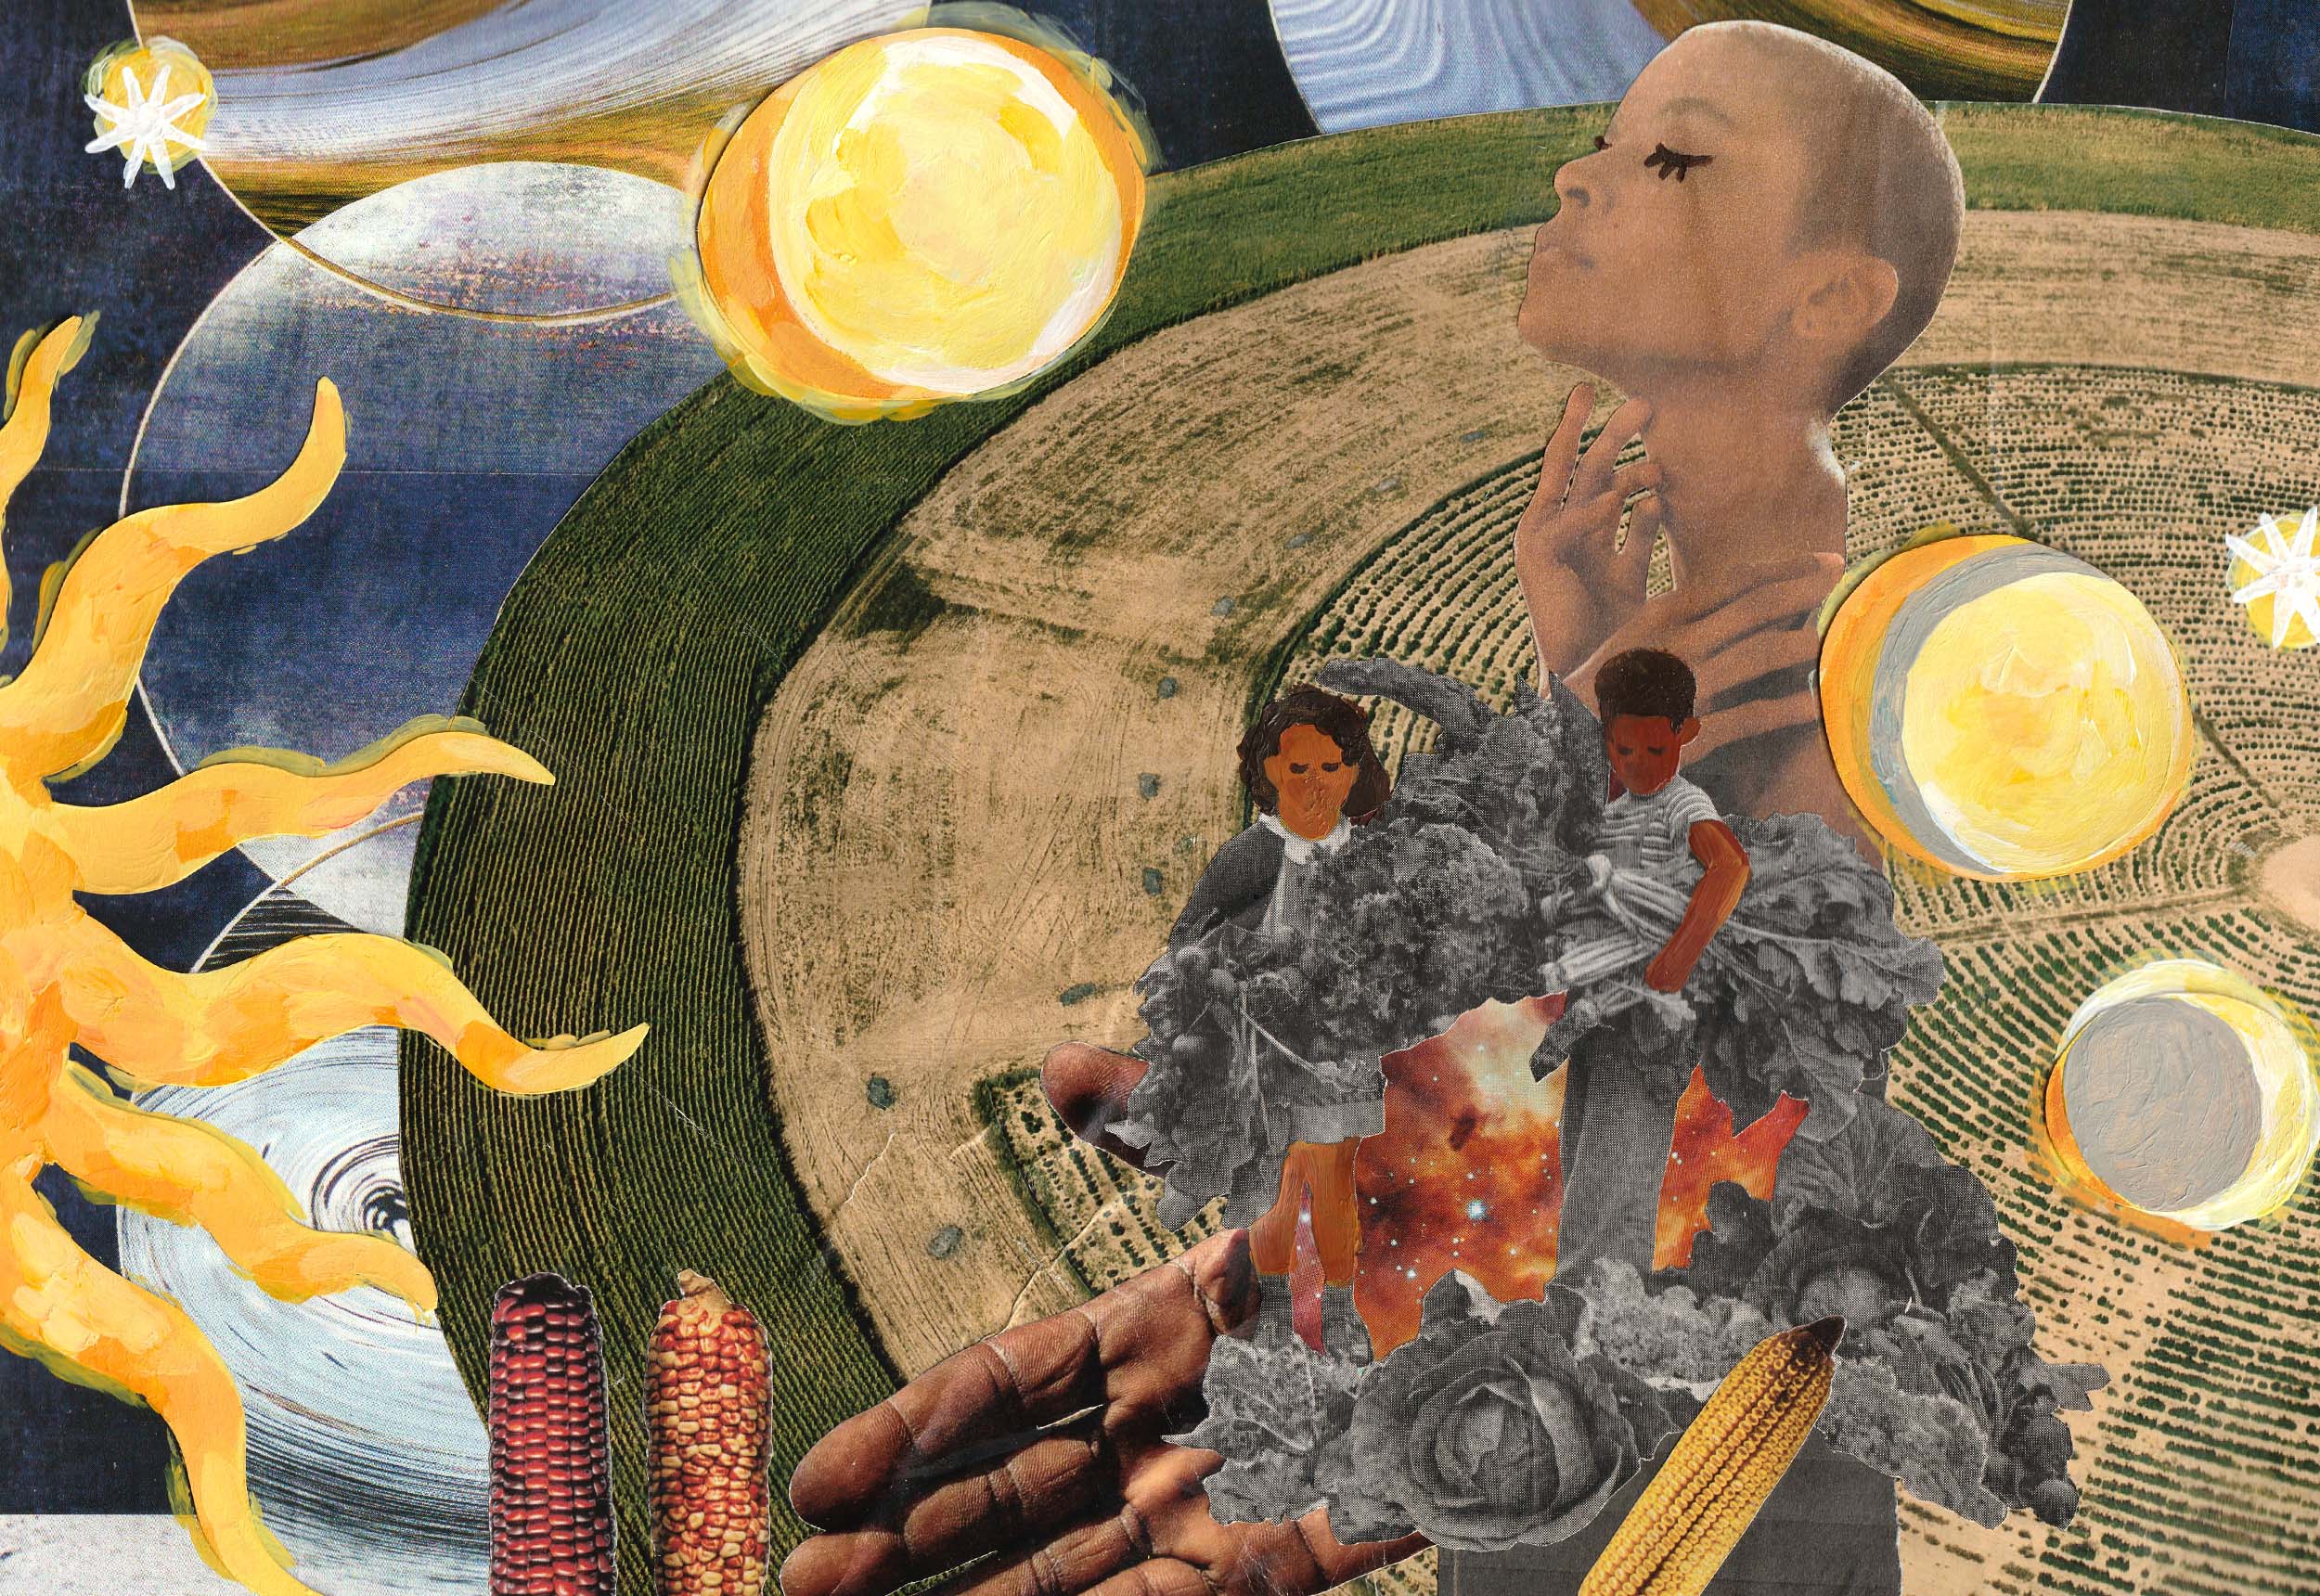 Feature image for virgo with crop rotation, the sun, moon cycles, corn crops, Black children holding black and white crops and a woman reaching for her chin. October 2022